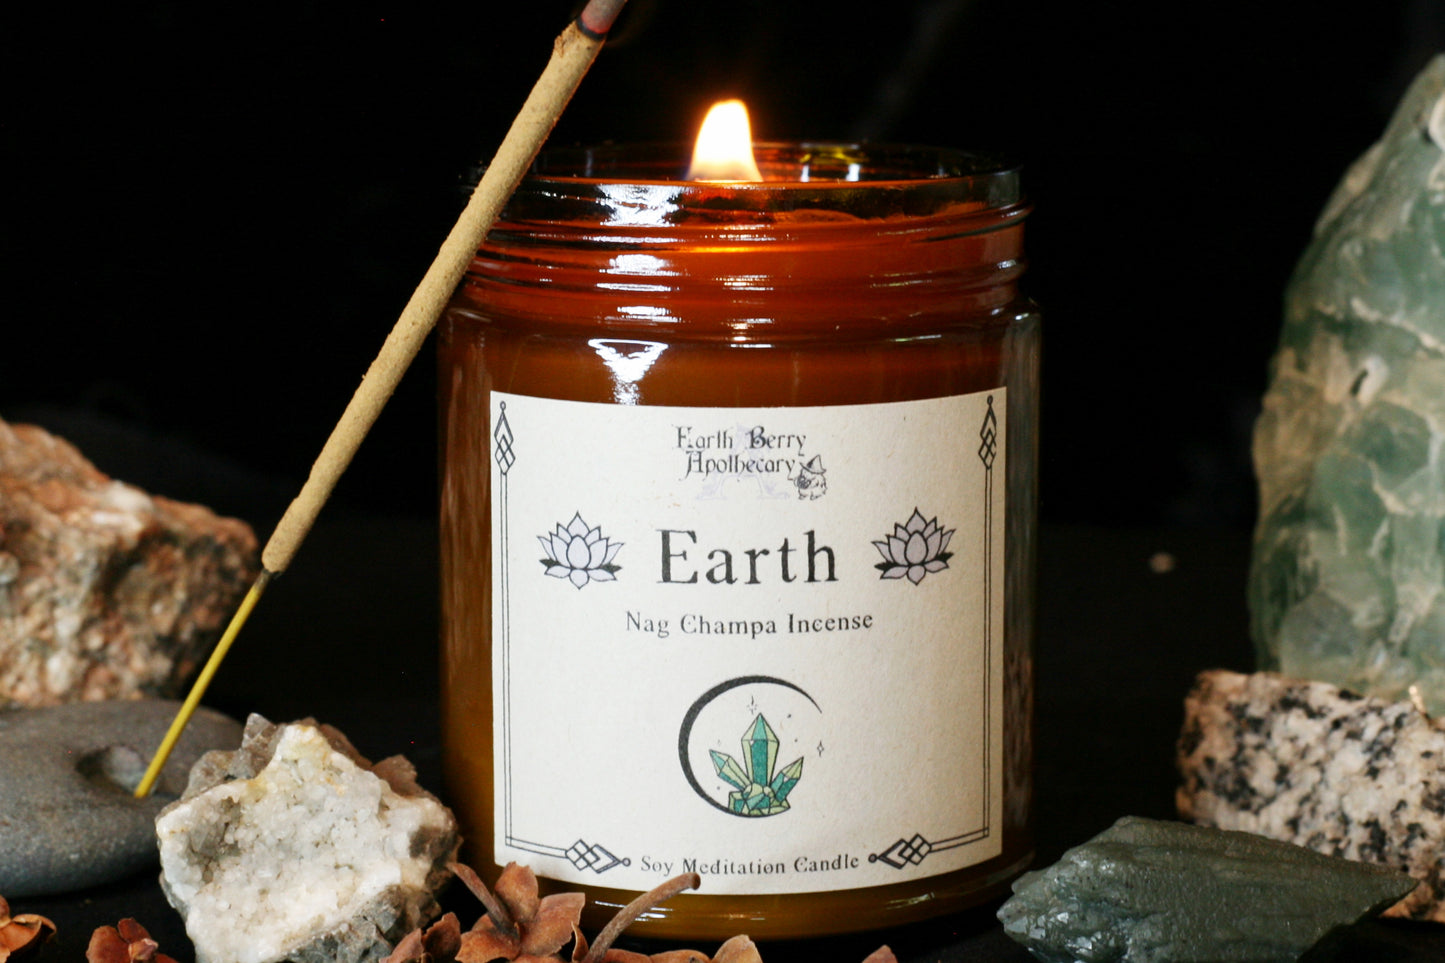 Earth Meditation Crackling Wood Wick Soy Candle